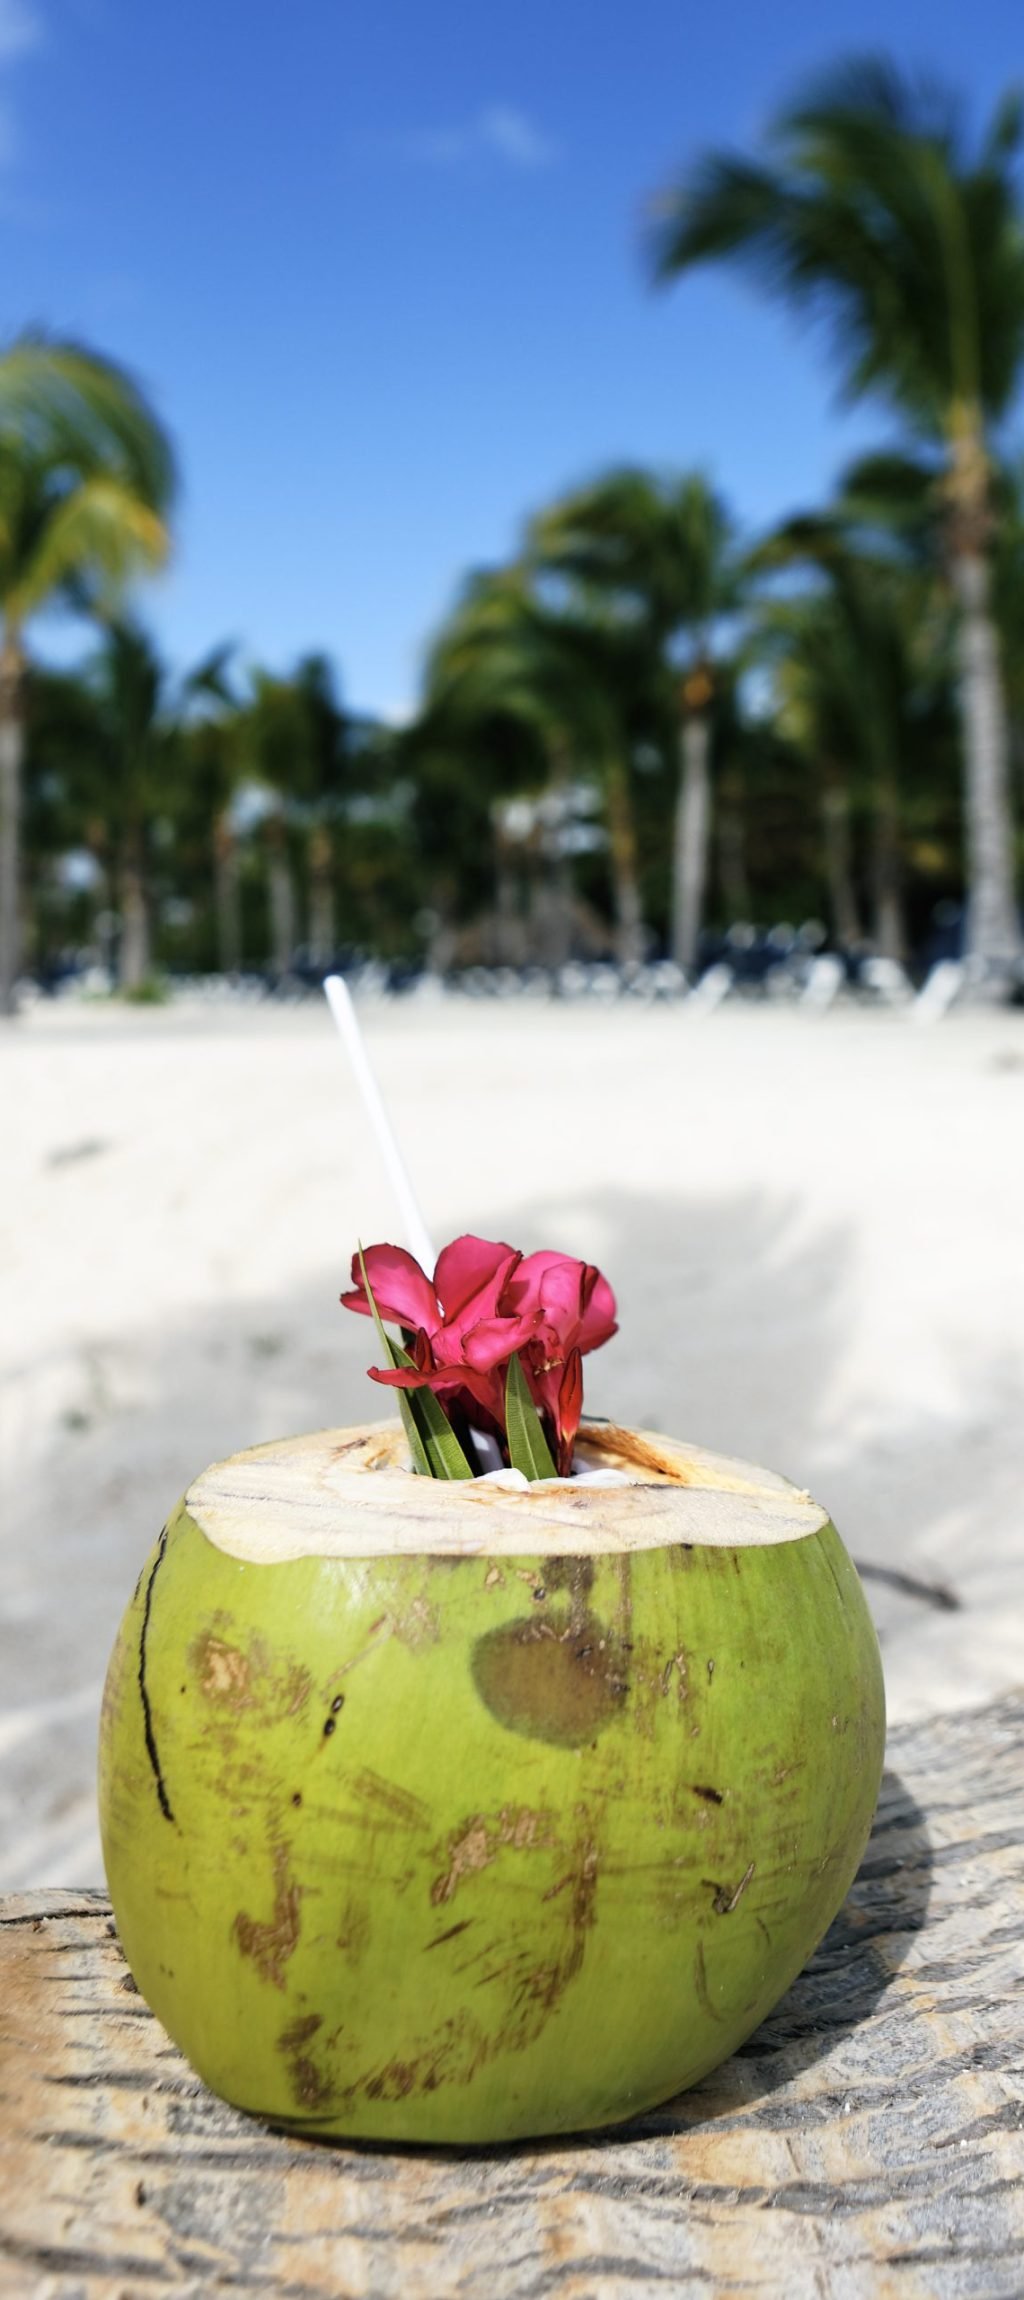 Coconut with drinking straw on a palm tree on beach